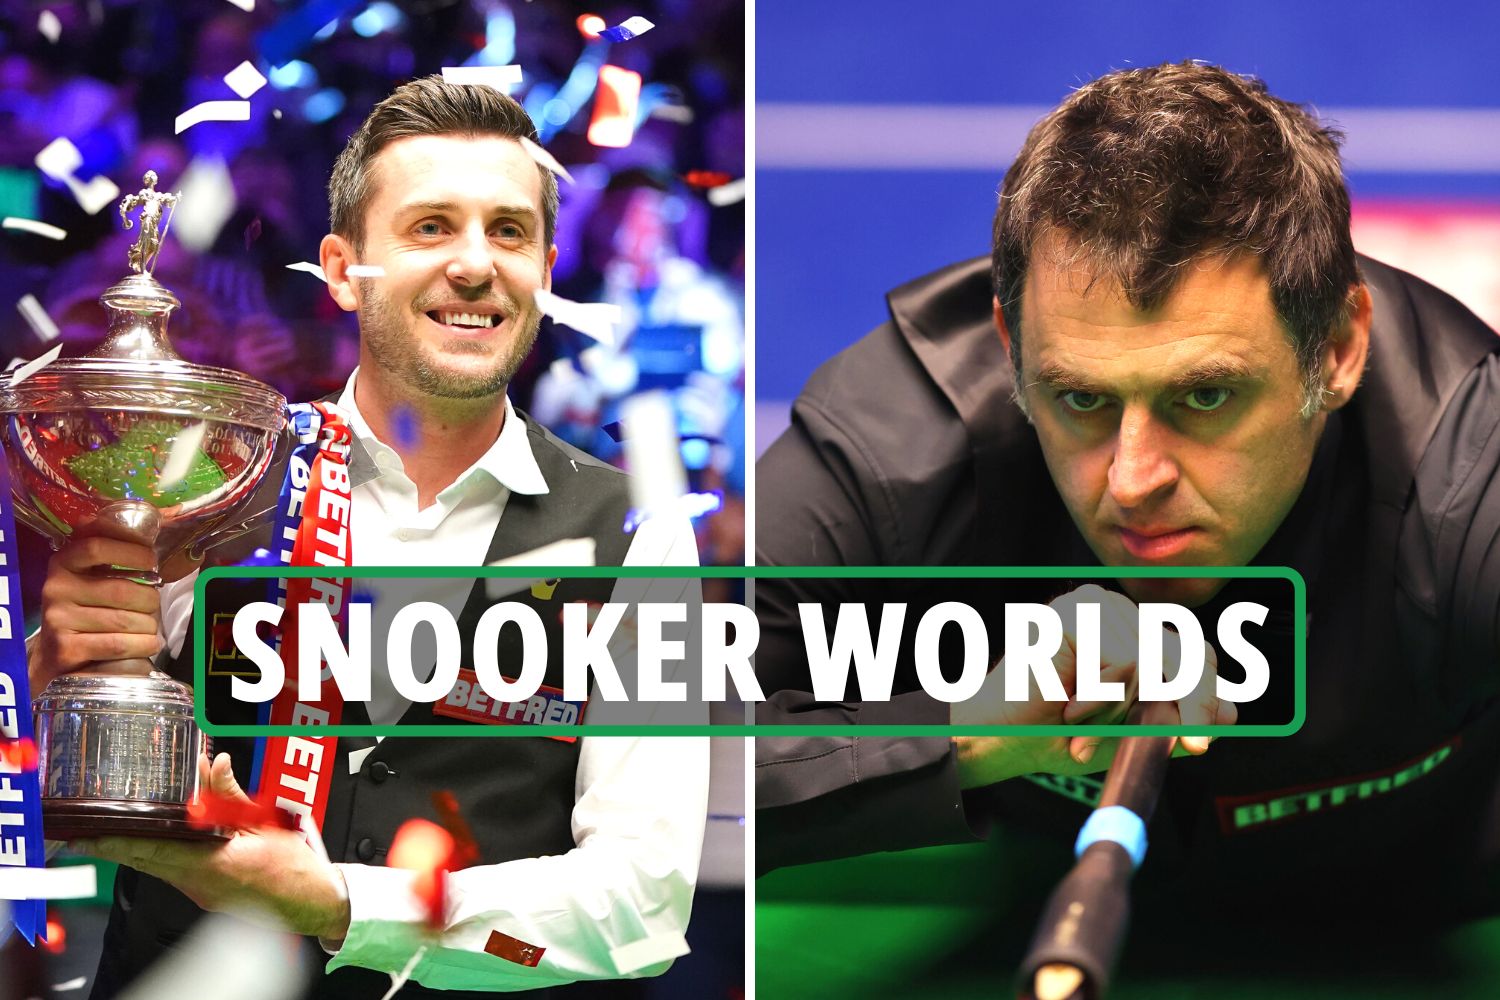 World Snooker Championship 2022 schedule and results: Live stream FREE and TV channel info